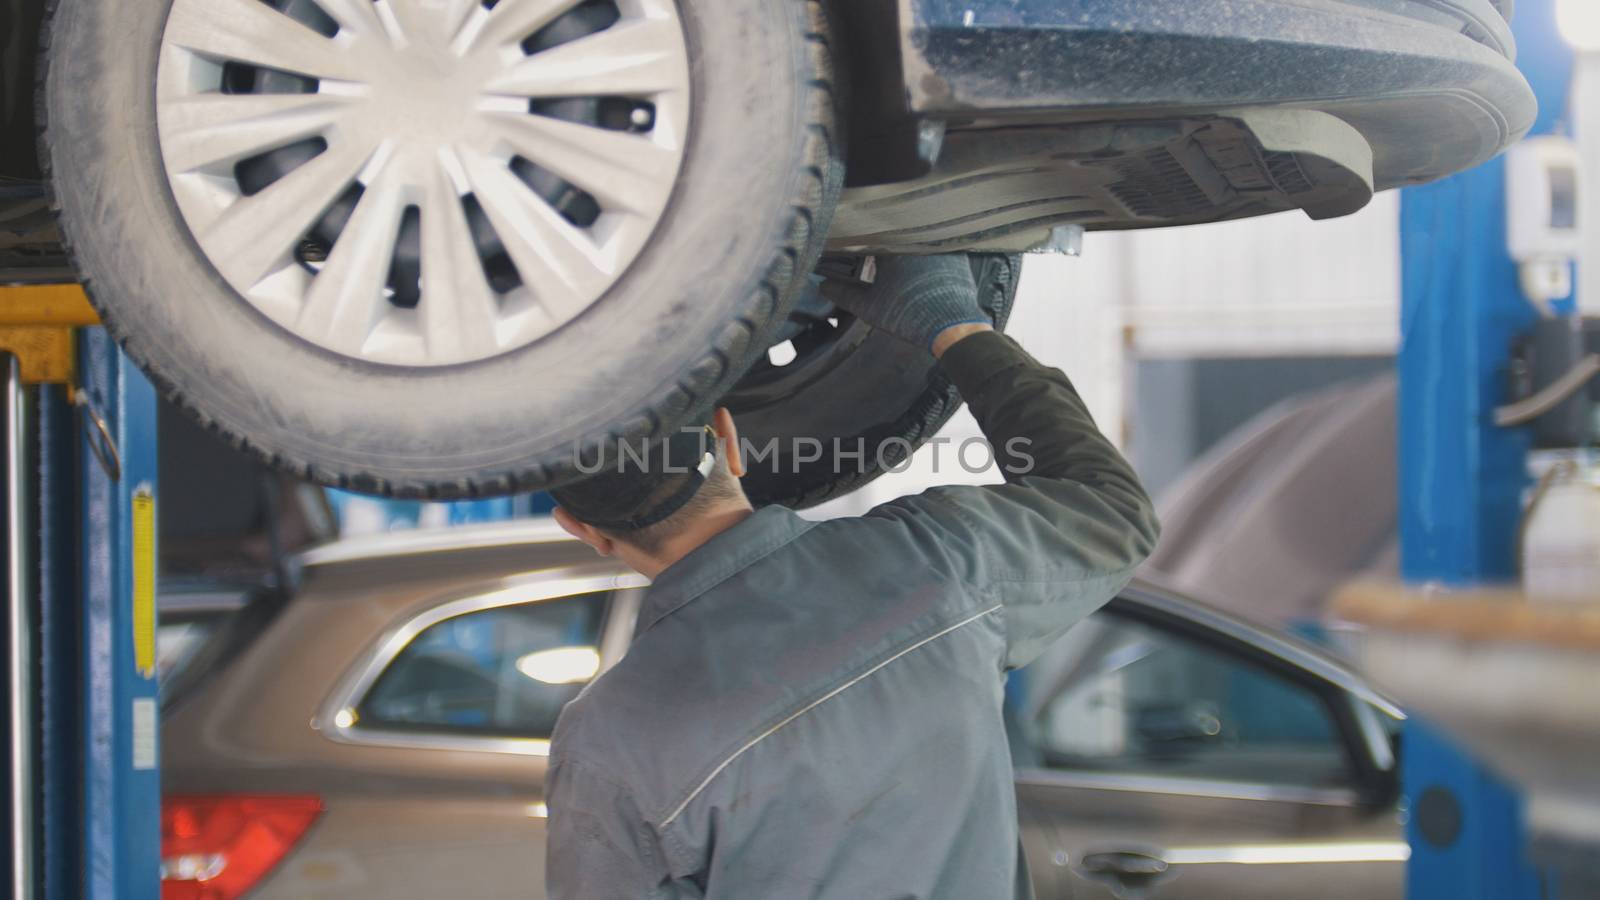 Mechanic working on a tire service on the lift in a service station, close up